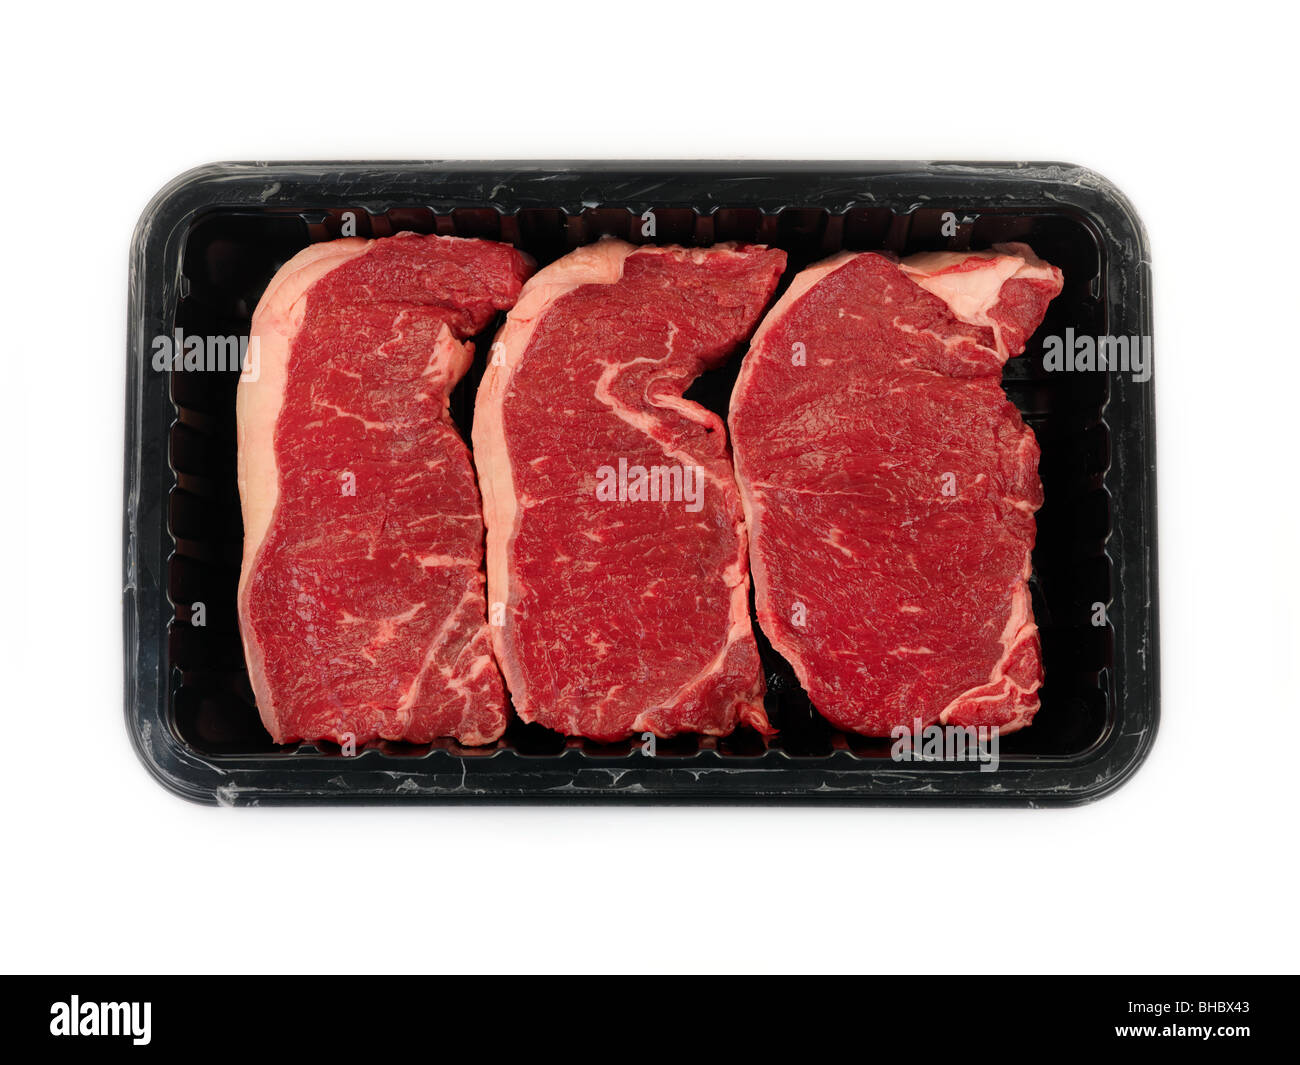 Supermarket packaged porterhouse steaks isolated against a white background Stock Photo